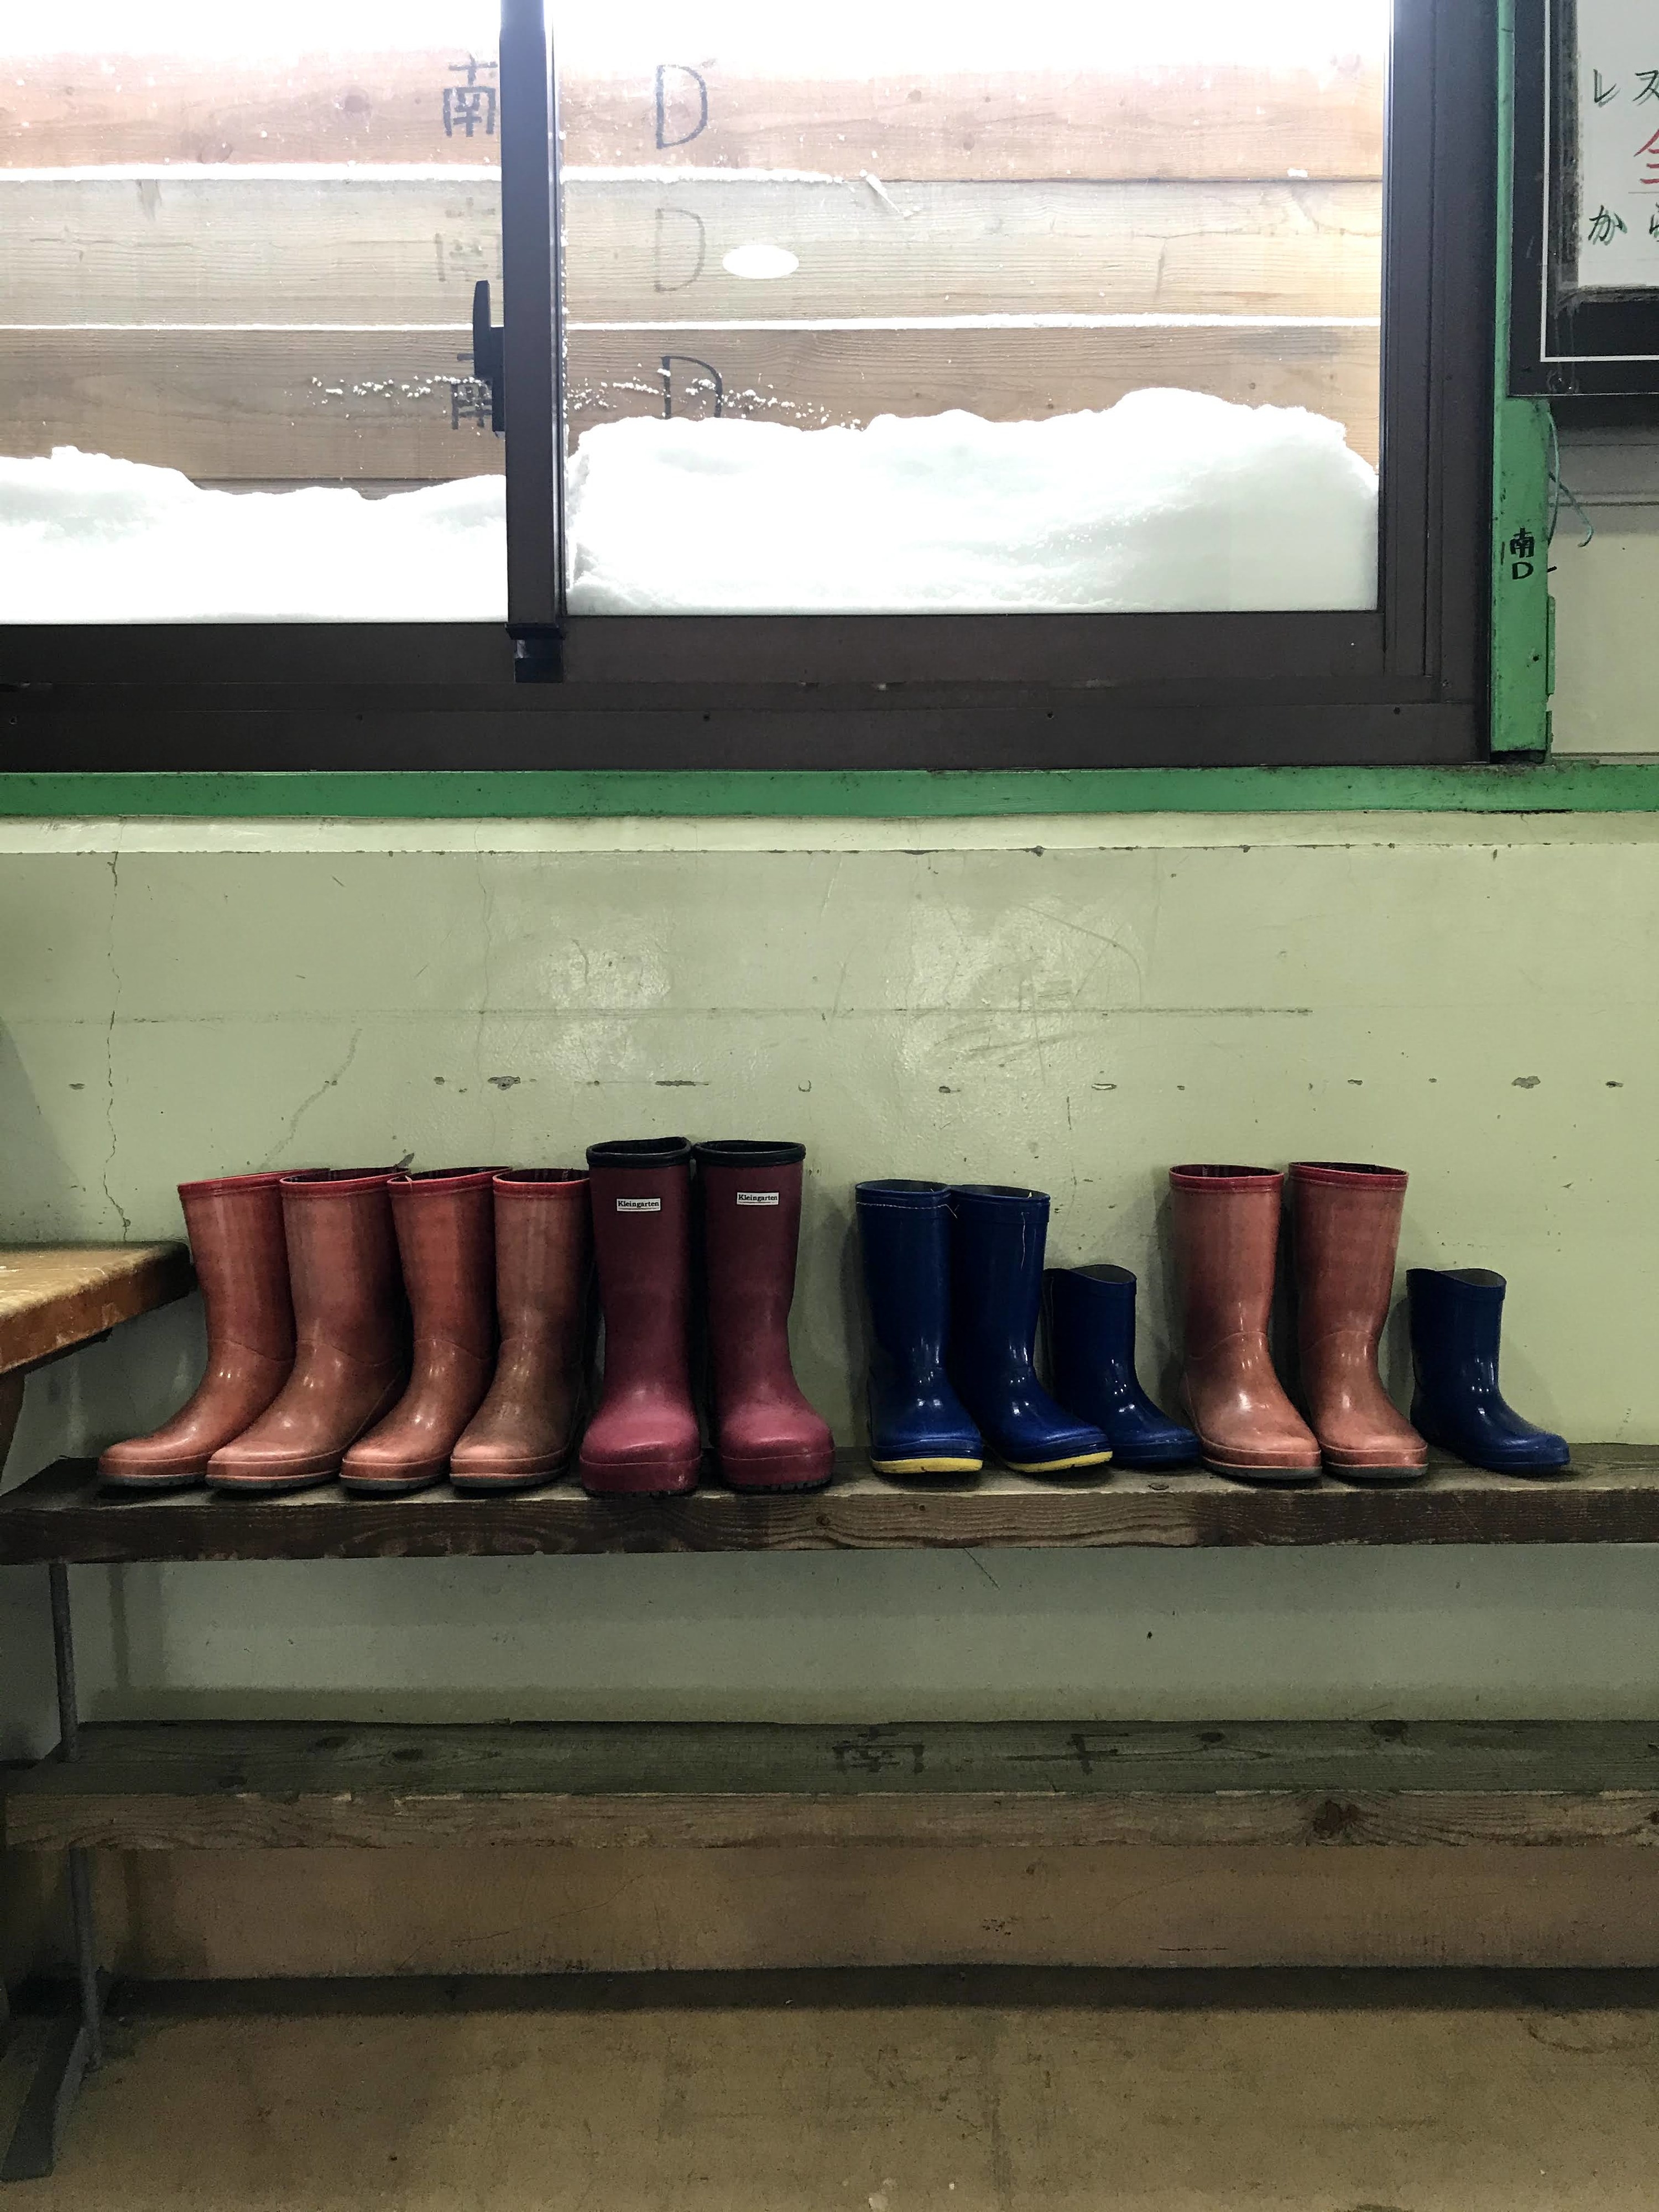 A line of rain boots on a bench